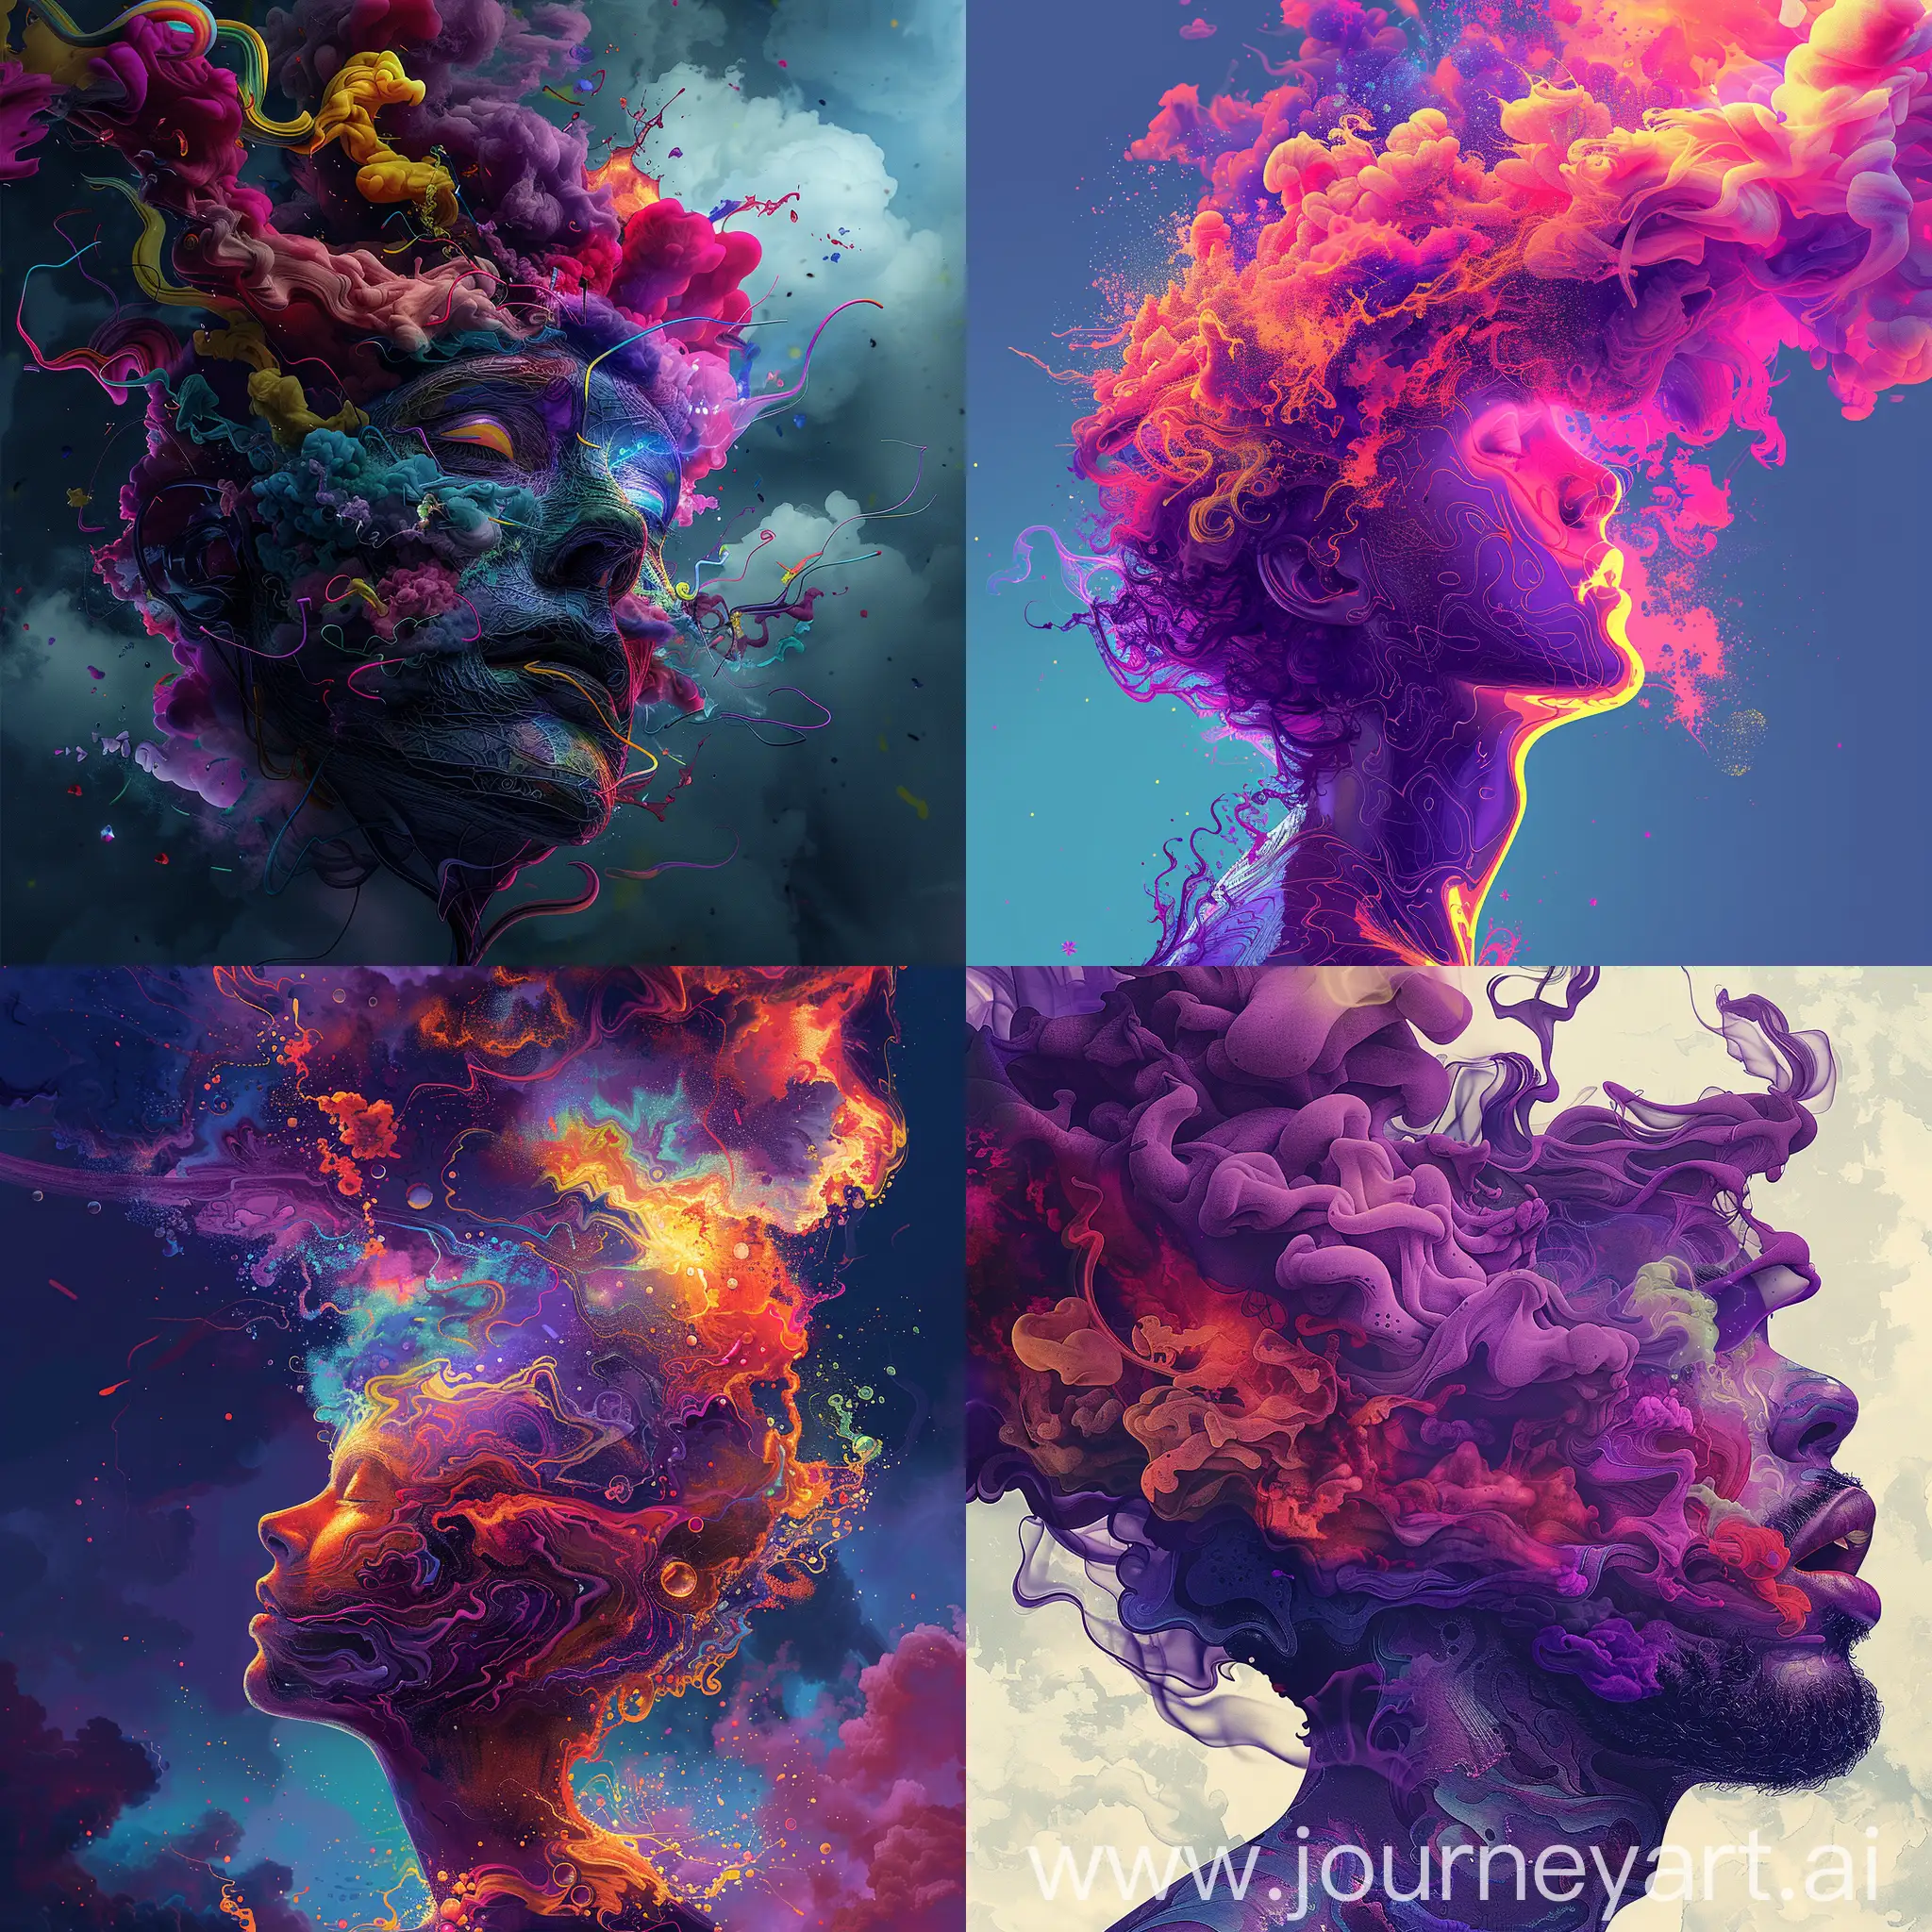 Psychedelic-Portrait-Illustration-Chaotic-Storm-of-Liquid-Smoke-in-Futuristic-Fashion-Abstract-Portrait